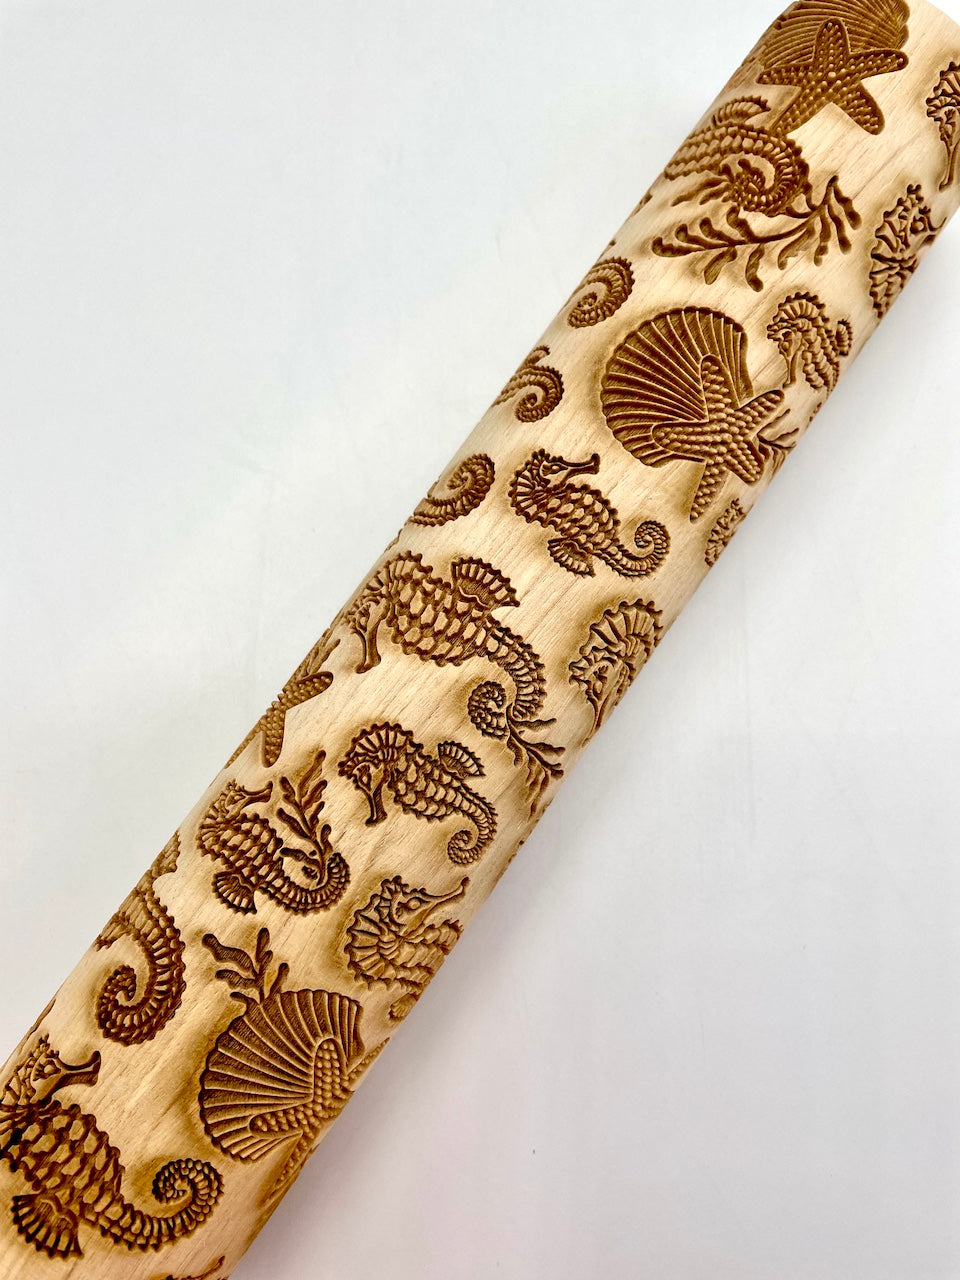 Seahorse Textured Rolling Pin